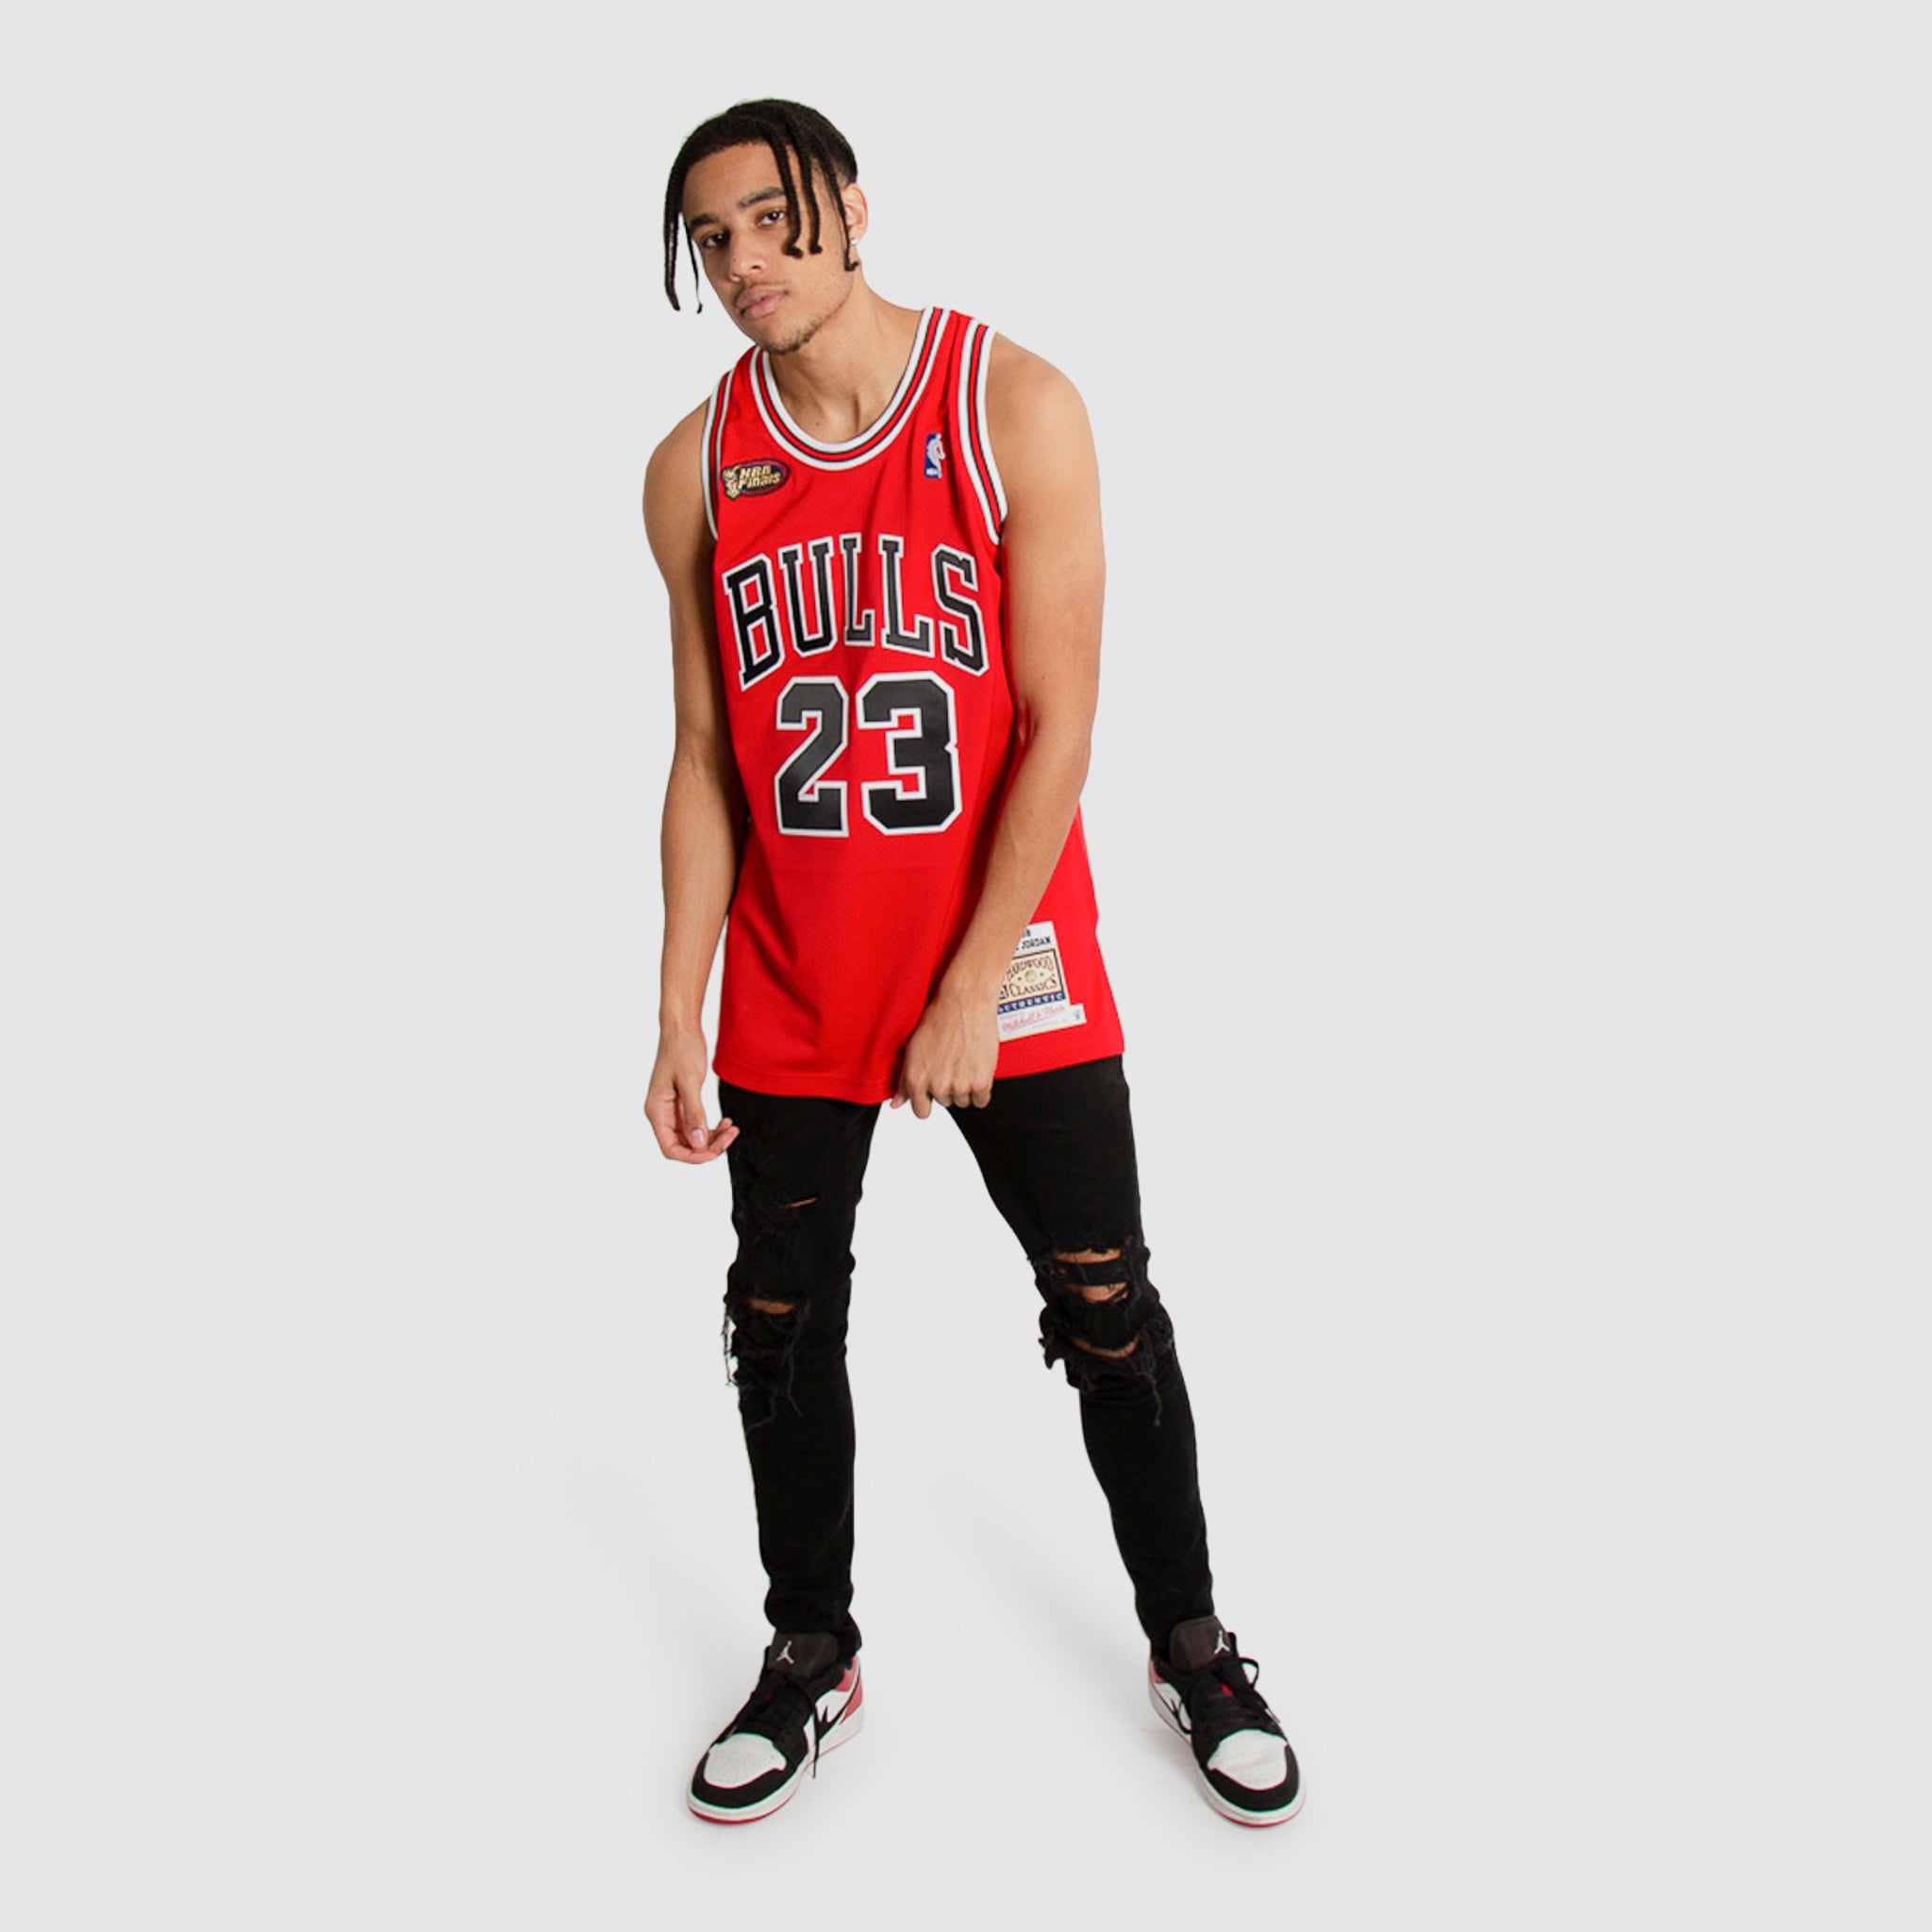 bulls jersey outfits